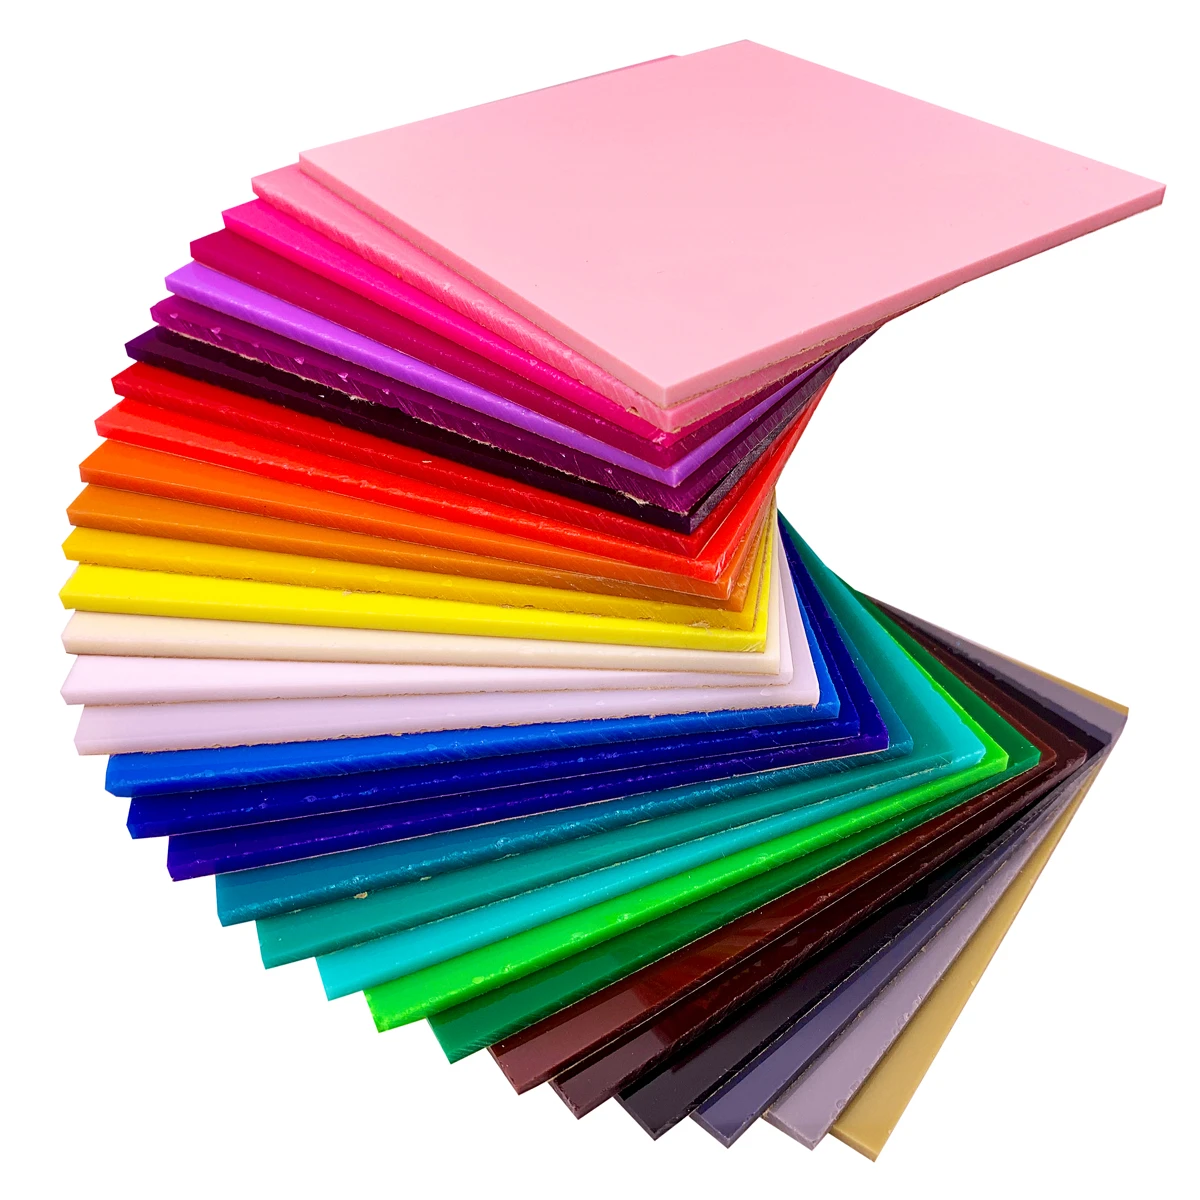 Acrylic Opaque/Solid Color Sheets for Jewelry/Crafts/Art Works/Decoration - Pink, 1220x610x3.0mm (48" x 24" x .118")